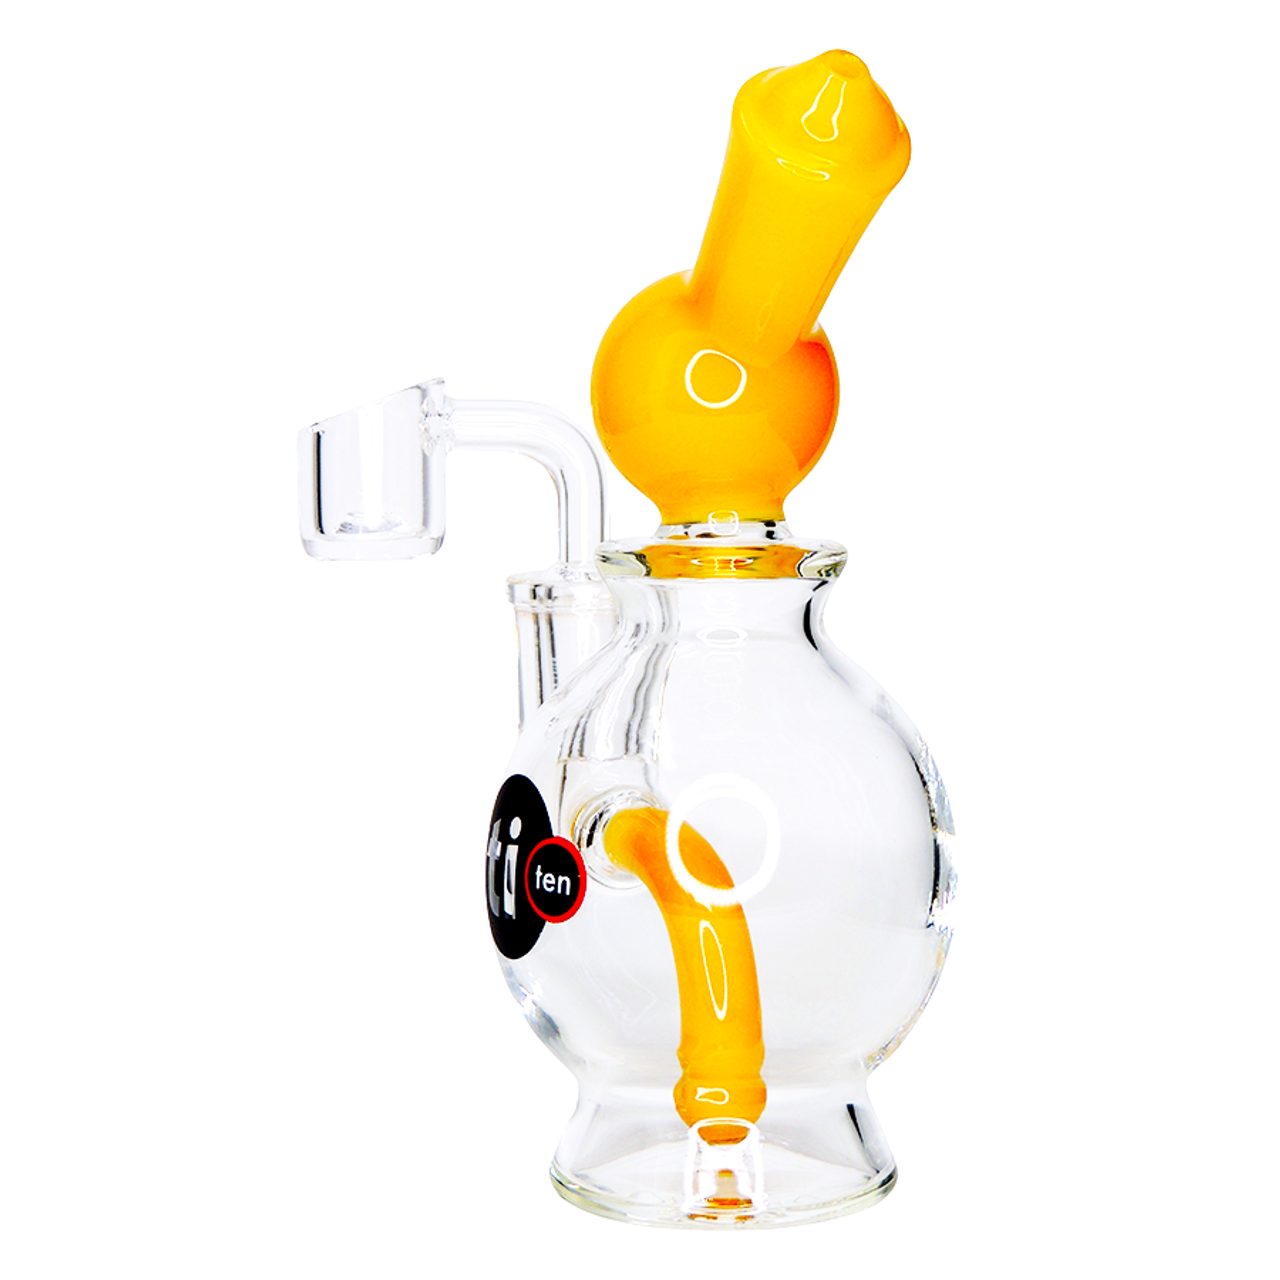 7 inch Rig Round Body and Banger